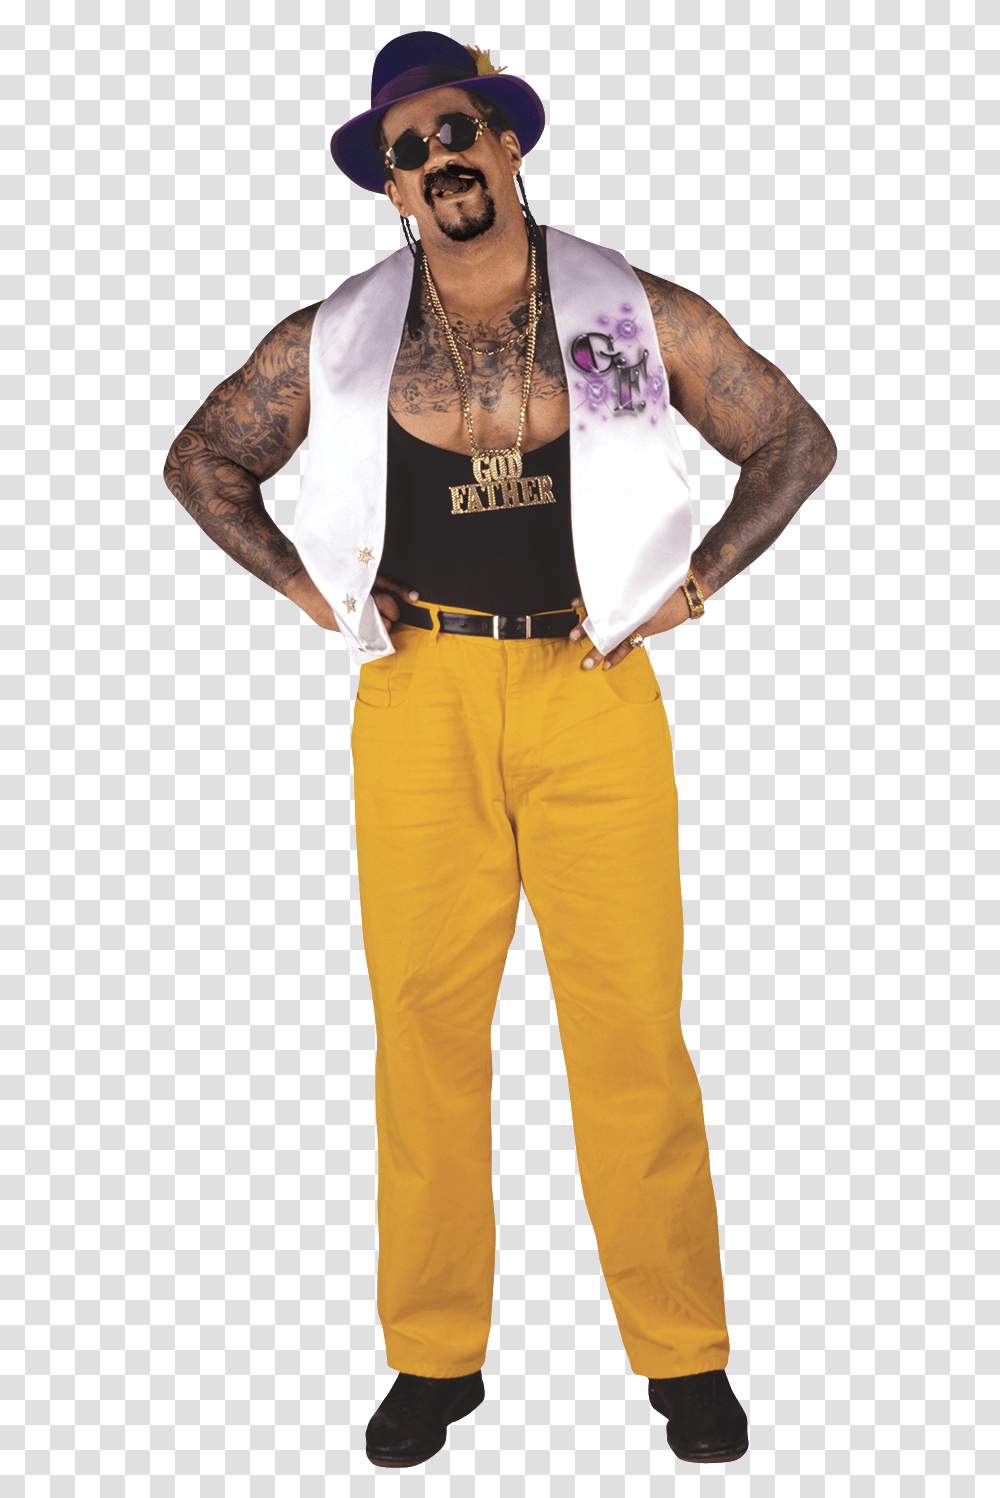 Godfather Wwe Costume, Skin, Person, Clothing, Sunglasses Transparent Png